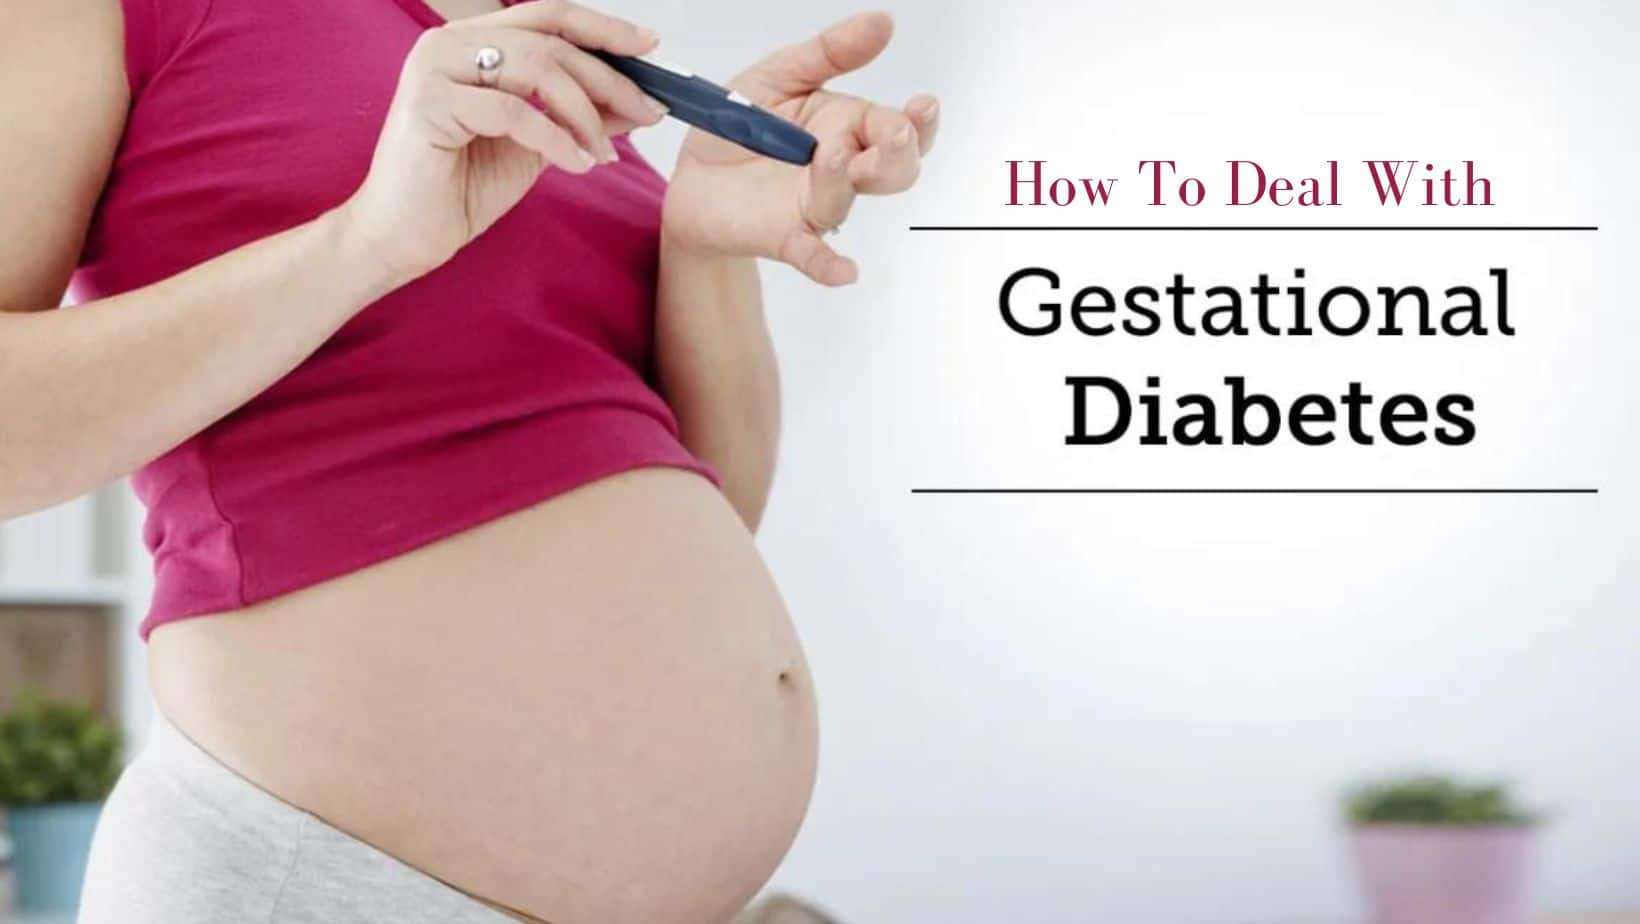 Gestational Diabetes Mellitus 10 Tips to Lower Blood Sugar Naturally During Pregnancy TheHealthSite